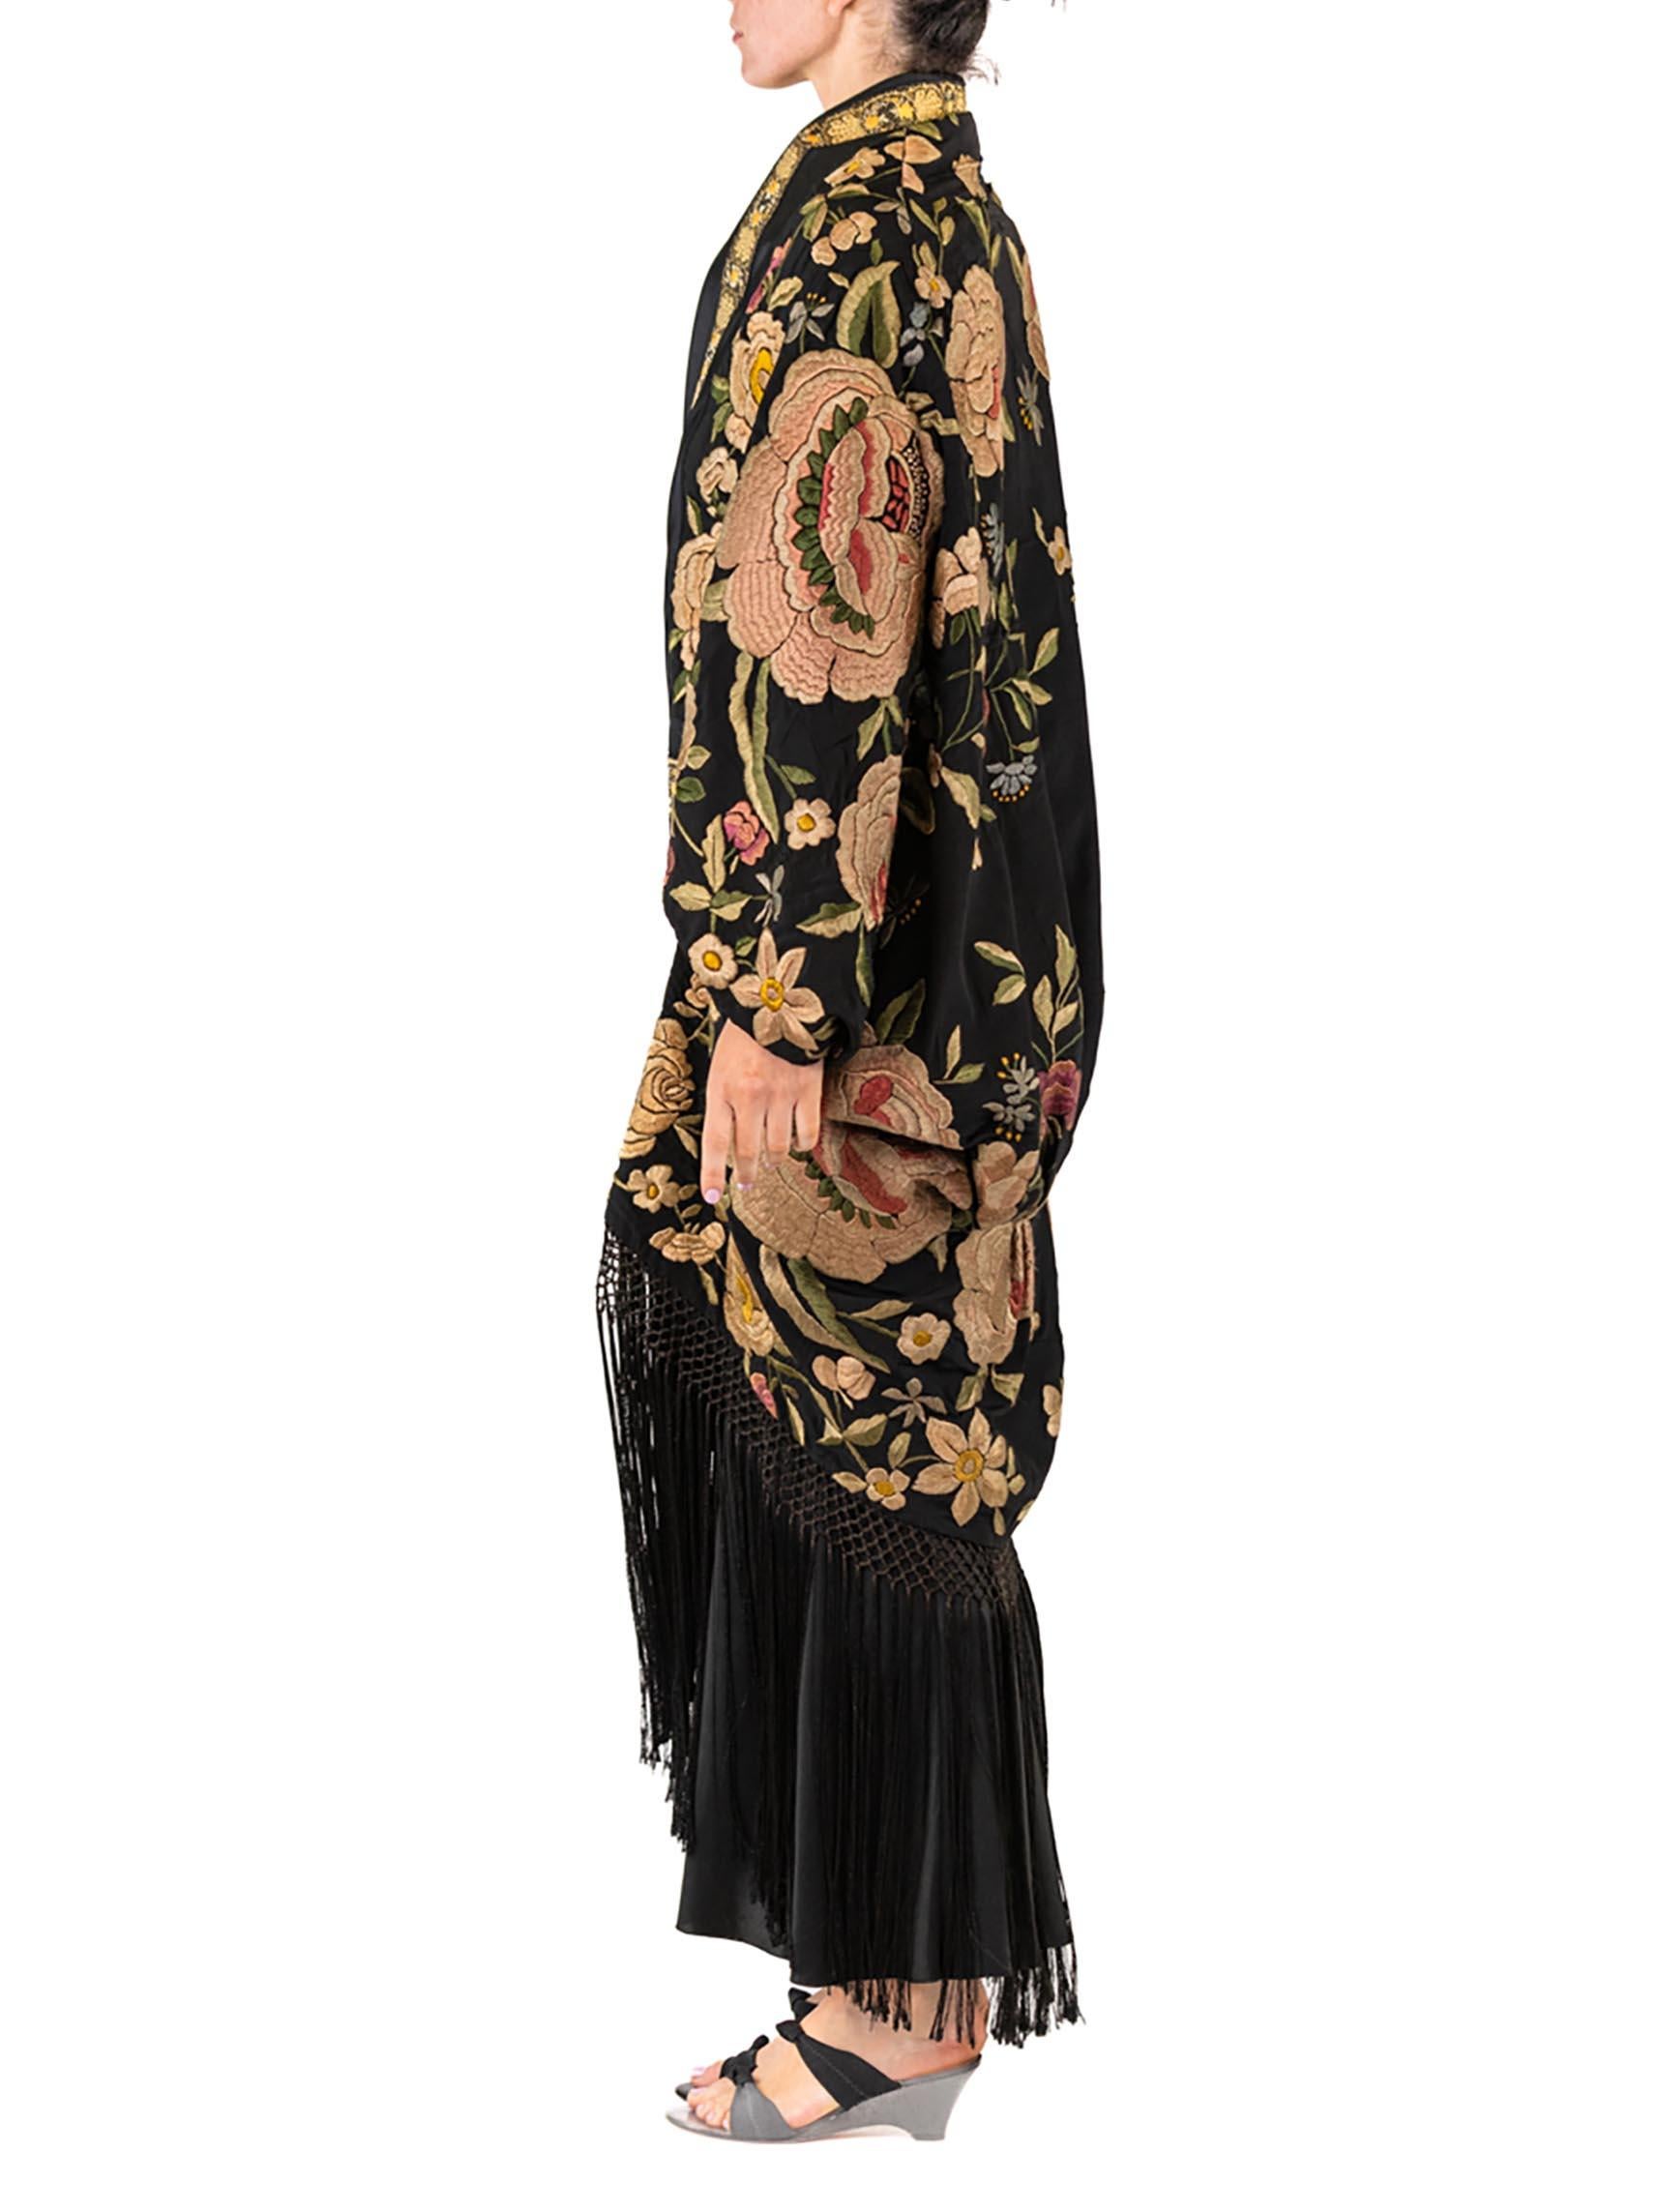 MORPHEW ATELIER Black Hand Embroidered Silk Floral Cocoon With Fringe And Vinta In New Condition For Sale In New York, NY